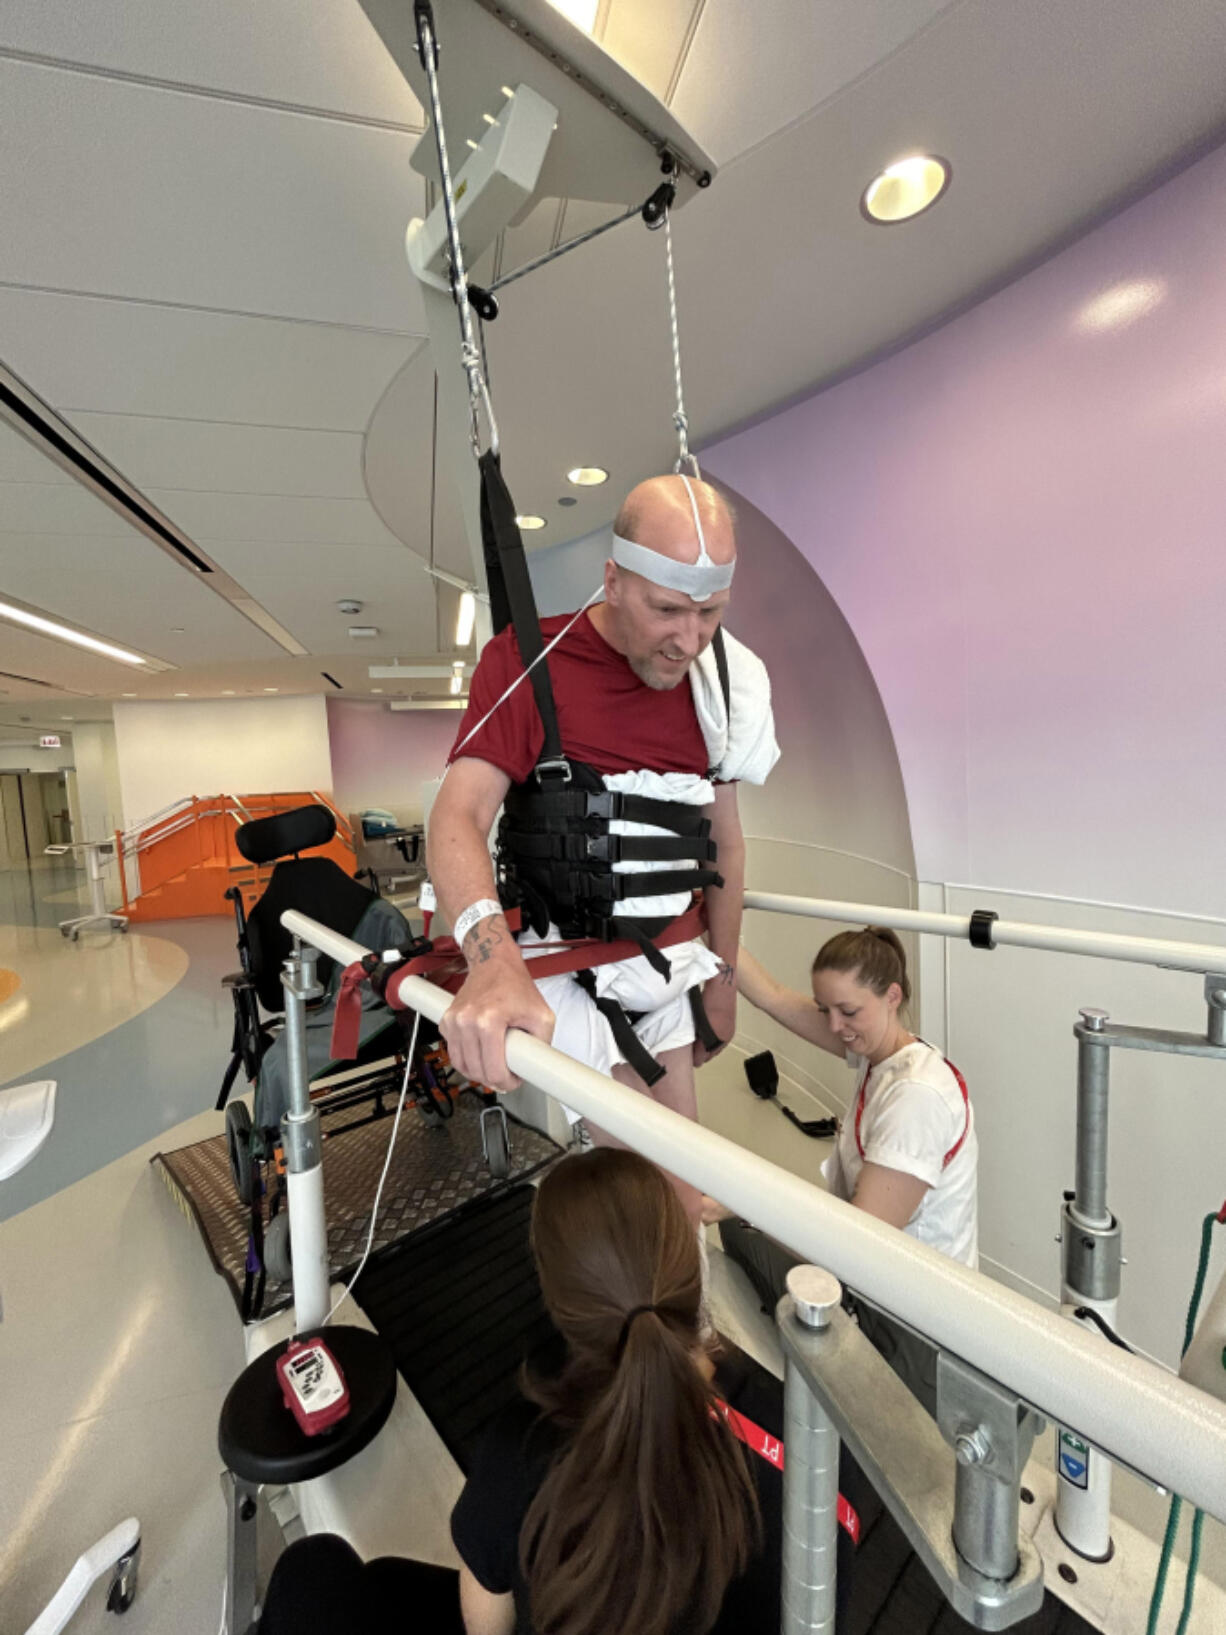 Scott Munro, a longtime educator and administrator in Evergreen Public Schools, works through physical rehabilitation exercises at a treatment center in Chicago. Munro suffered a hypoxic brain injury during an elective orthopedic surgery last fall.